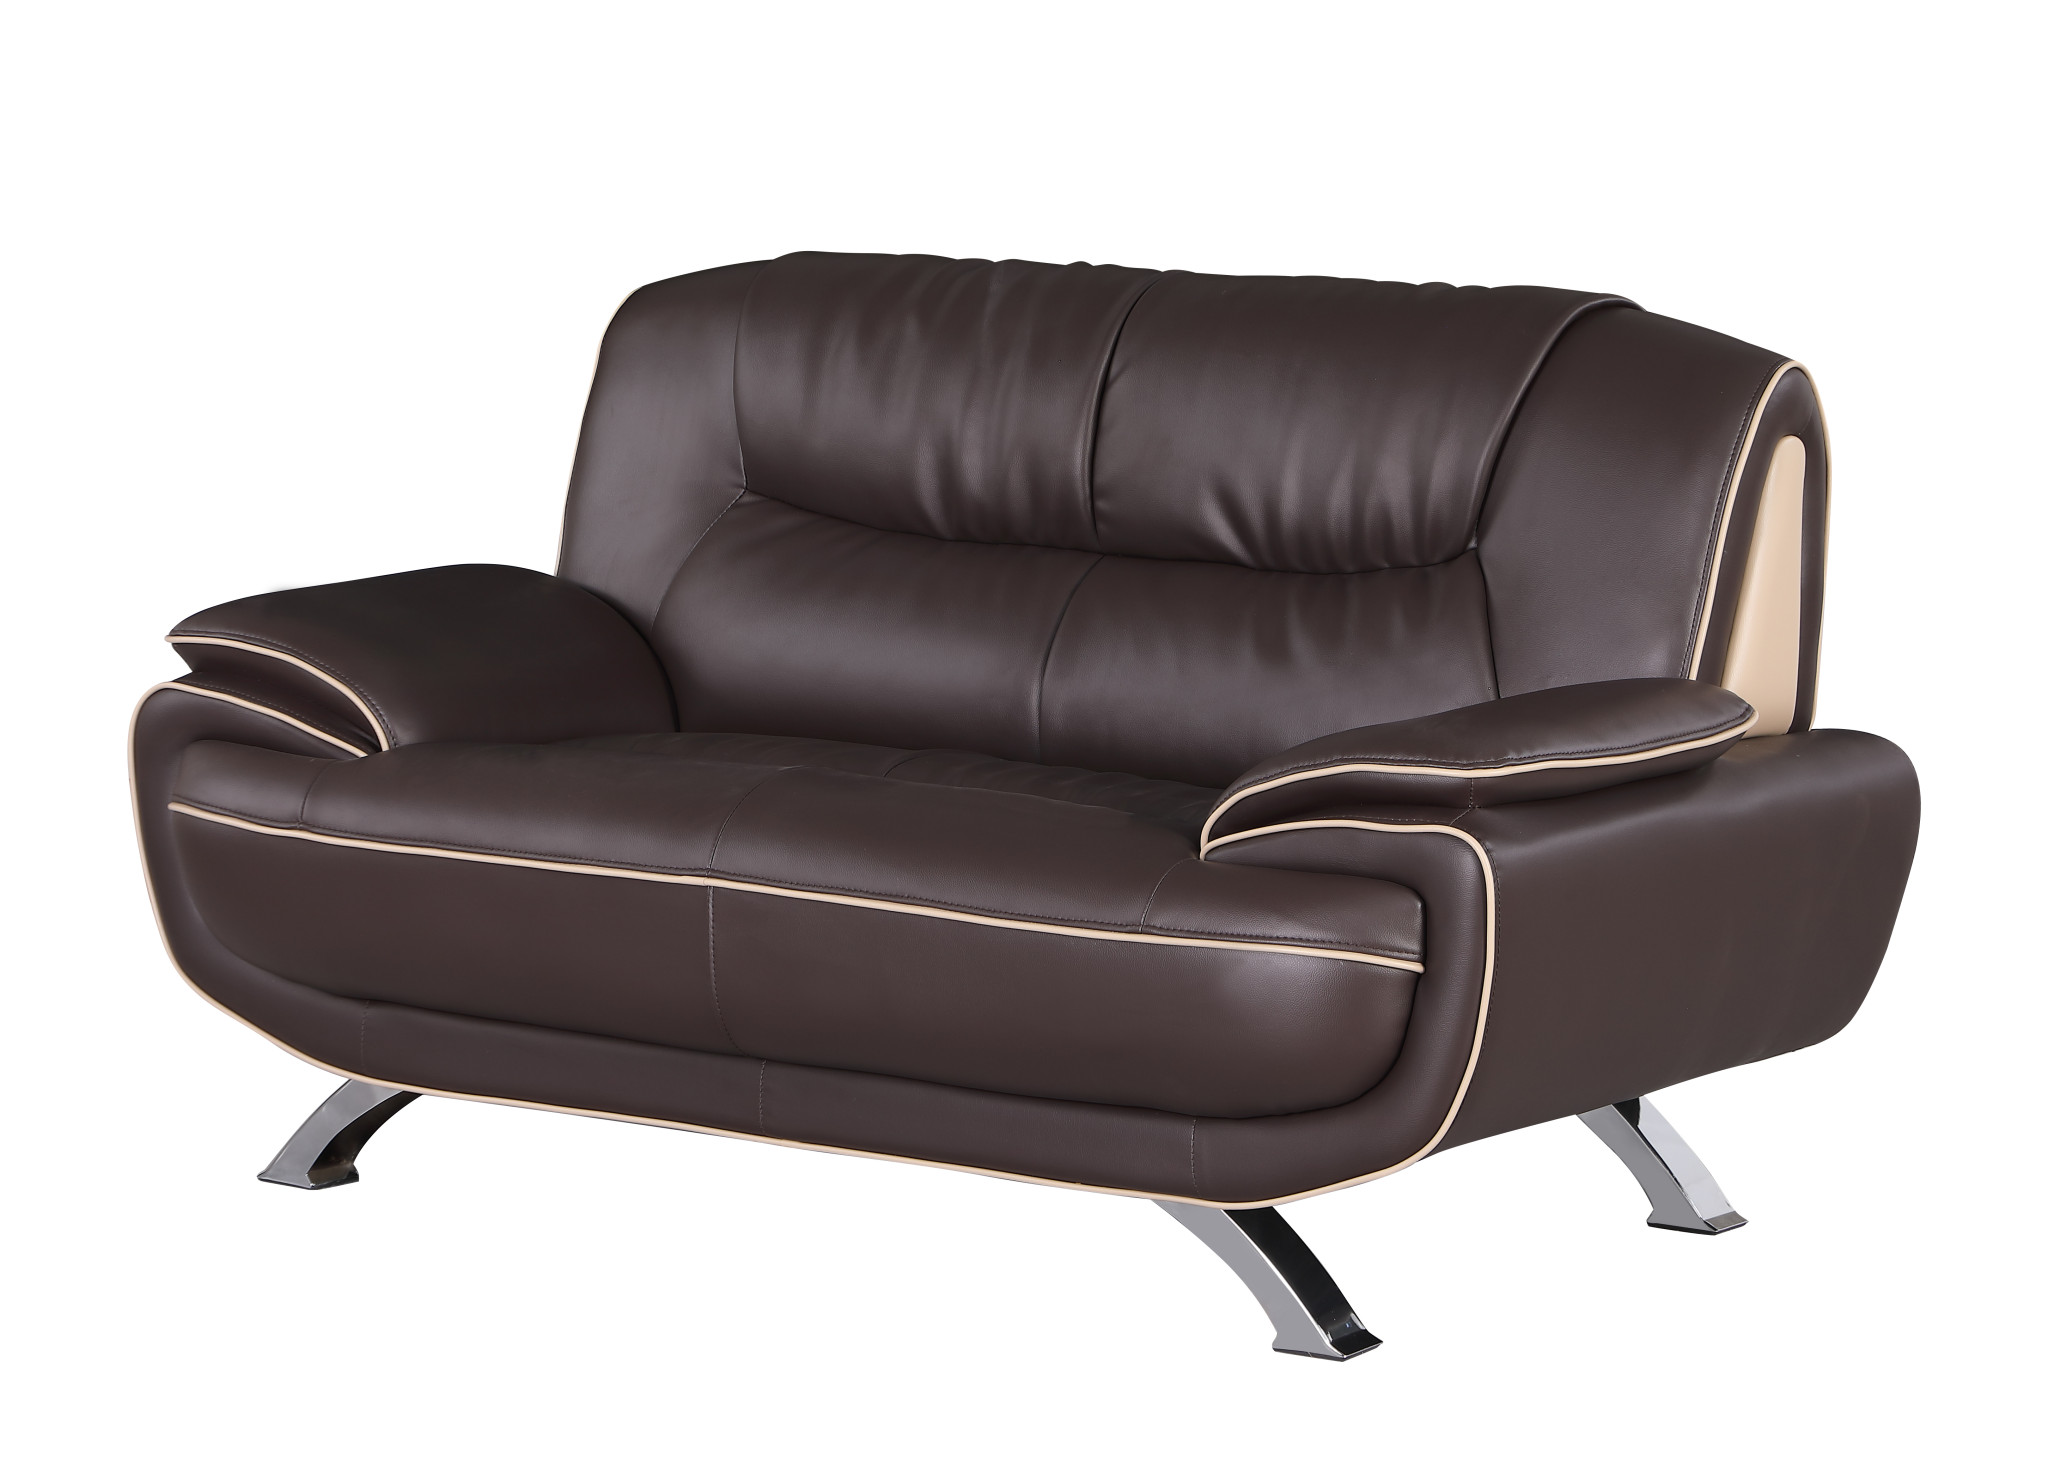 64" Brown And Silver Faux Leather Love Seat-329464-1